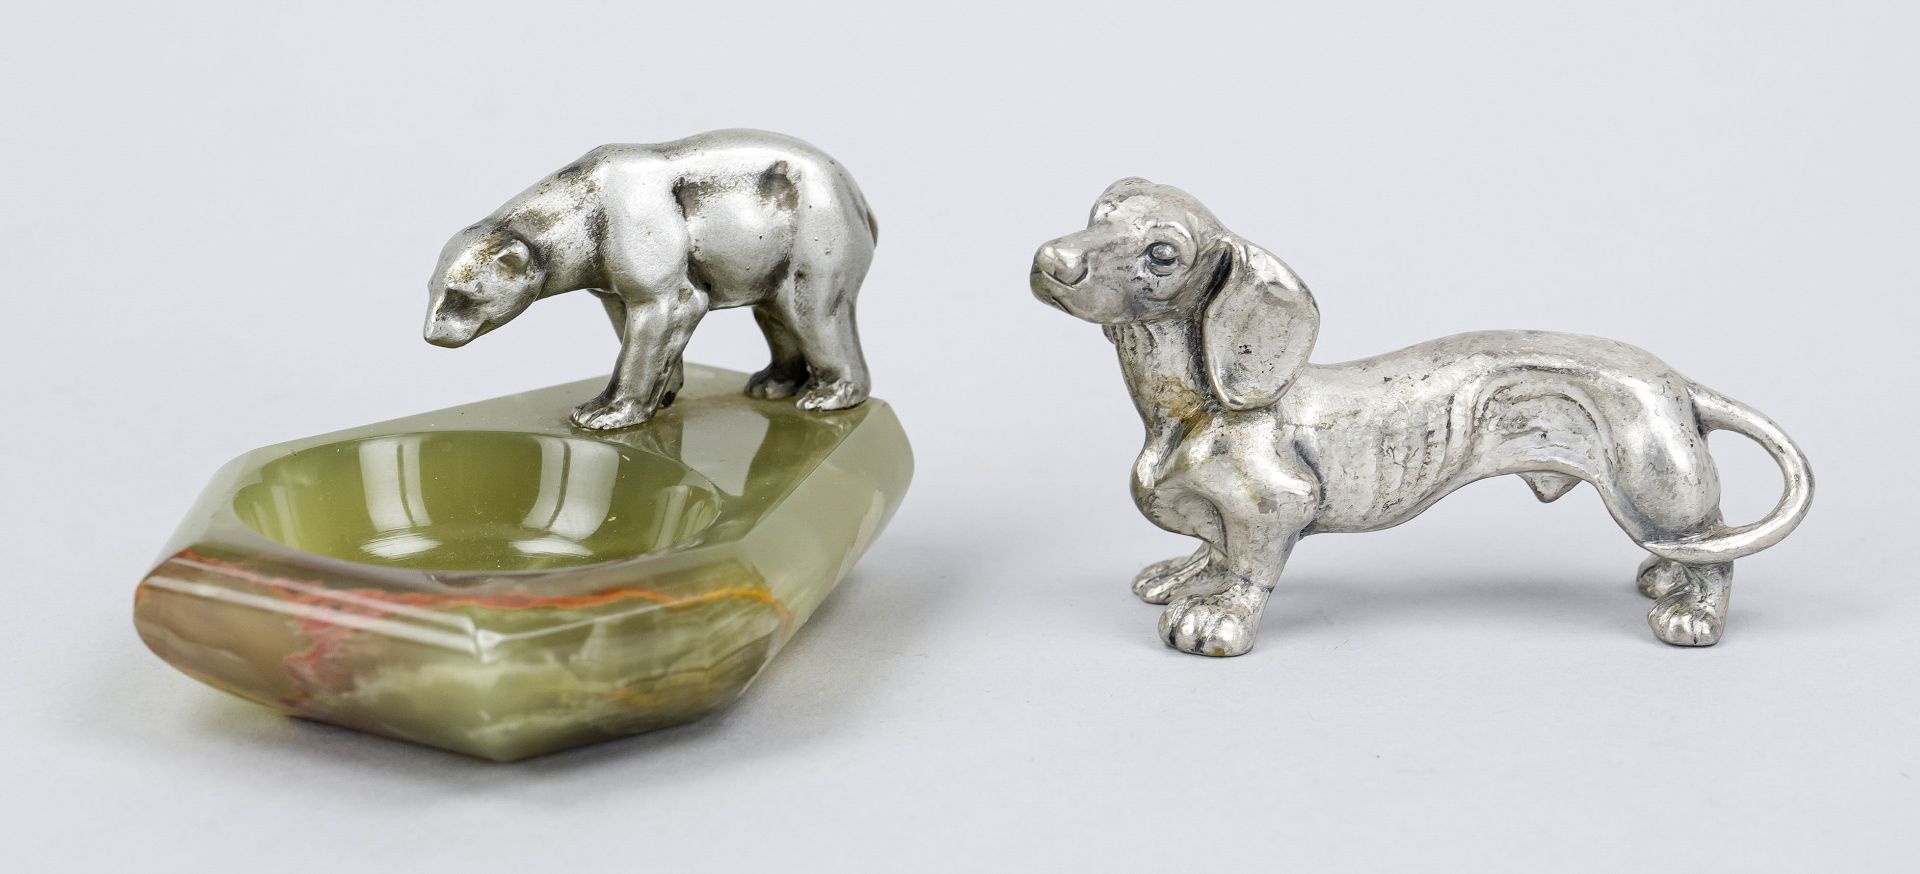 Two small bronzes, mid-20th century, dachshund and polar bear on a small onyx marble bowl, each